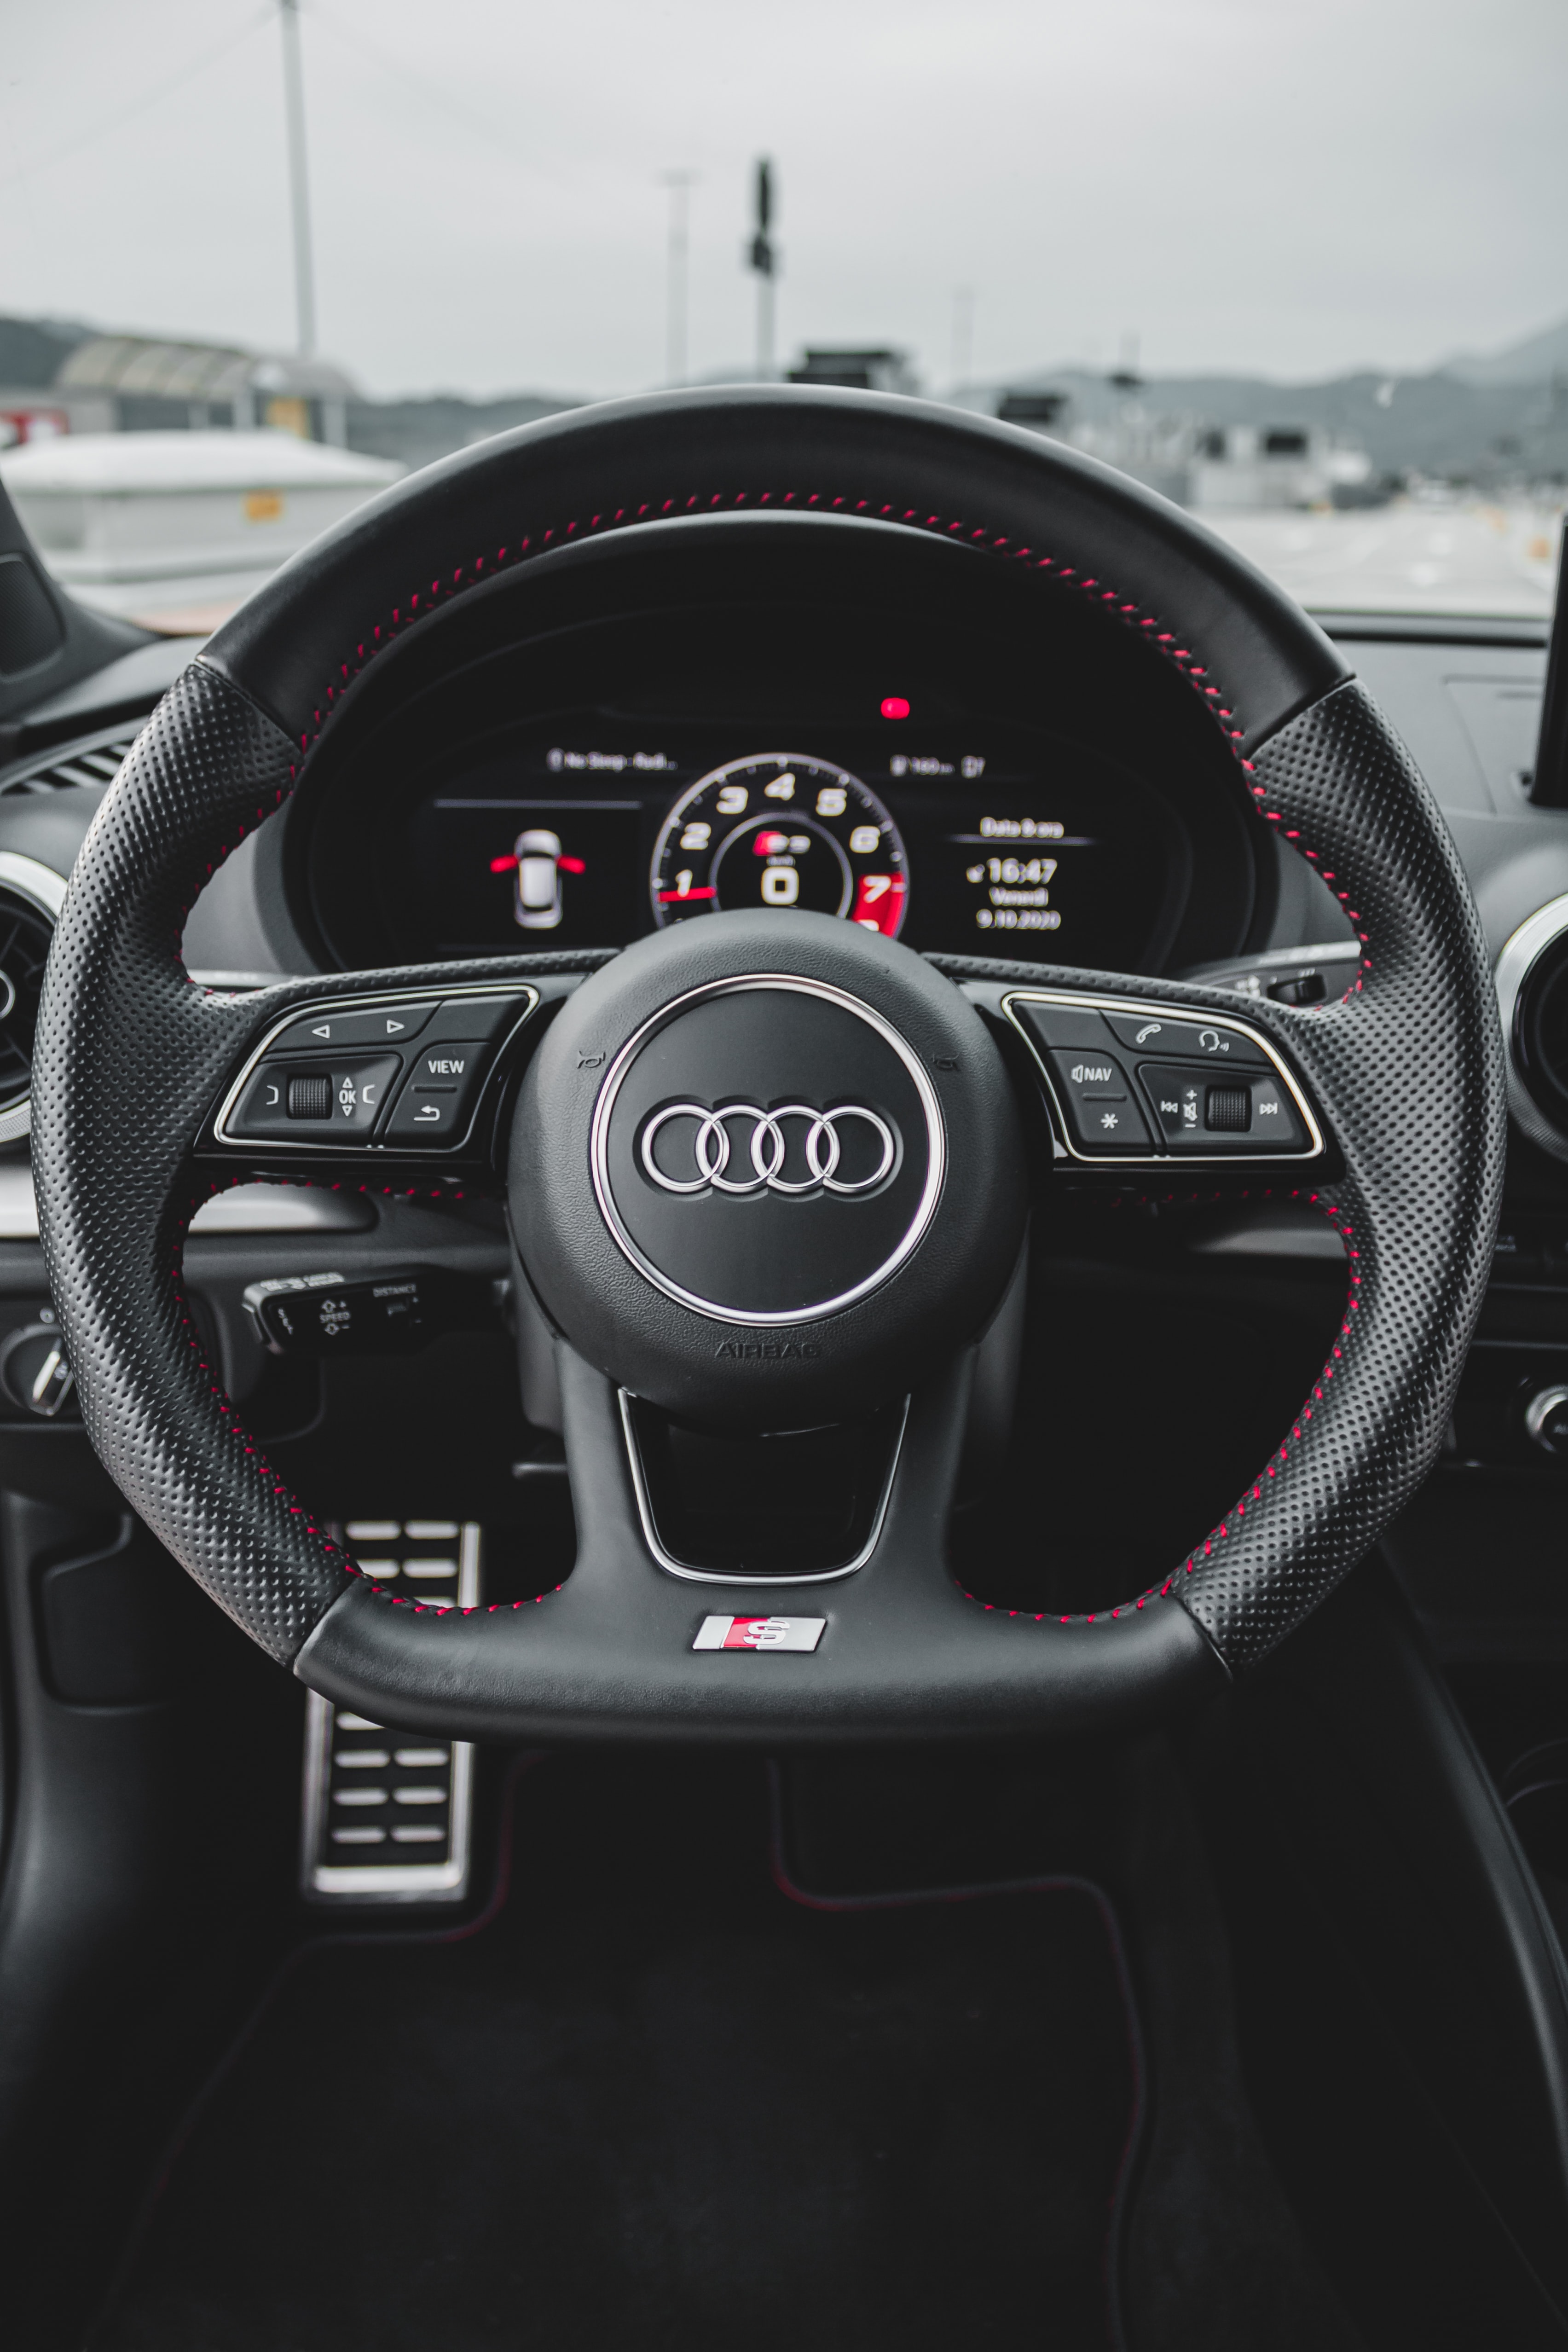 75735 Screensavers and Wallpapers Steering Wheel for phone. Download audi, cars, black, car, steering wheel, rudder, dashboard pictures for free